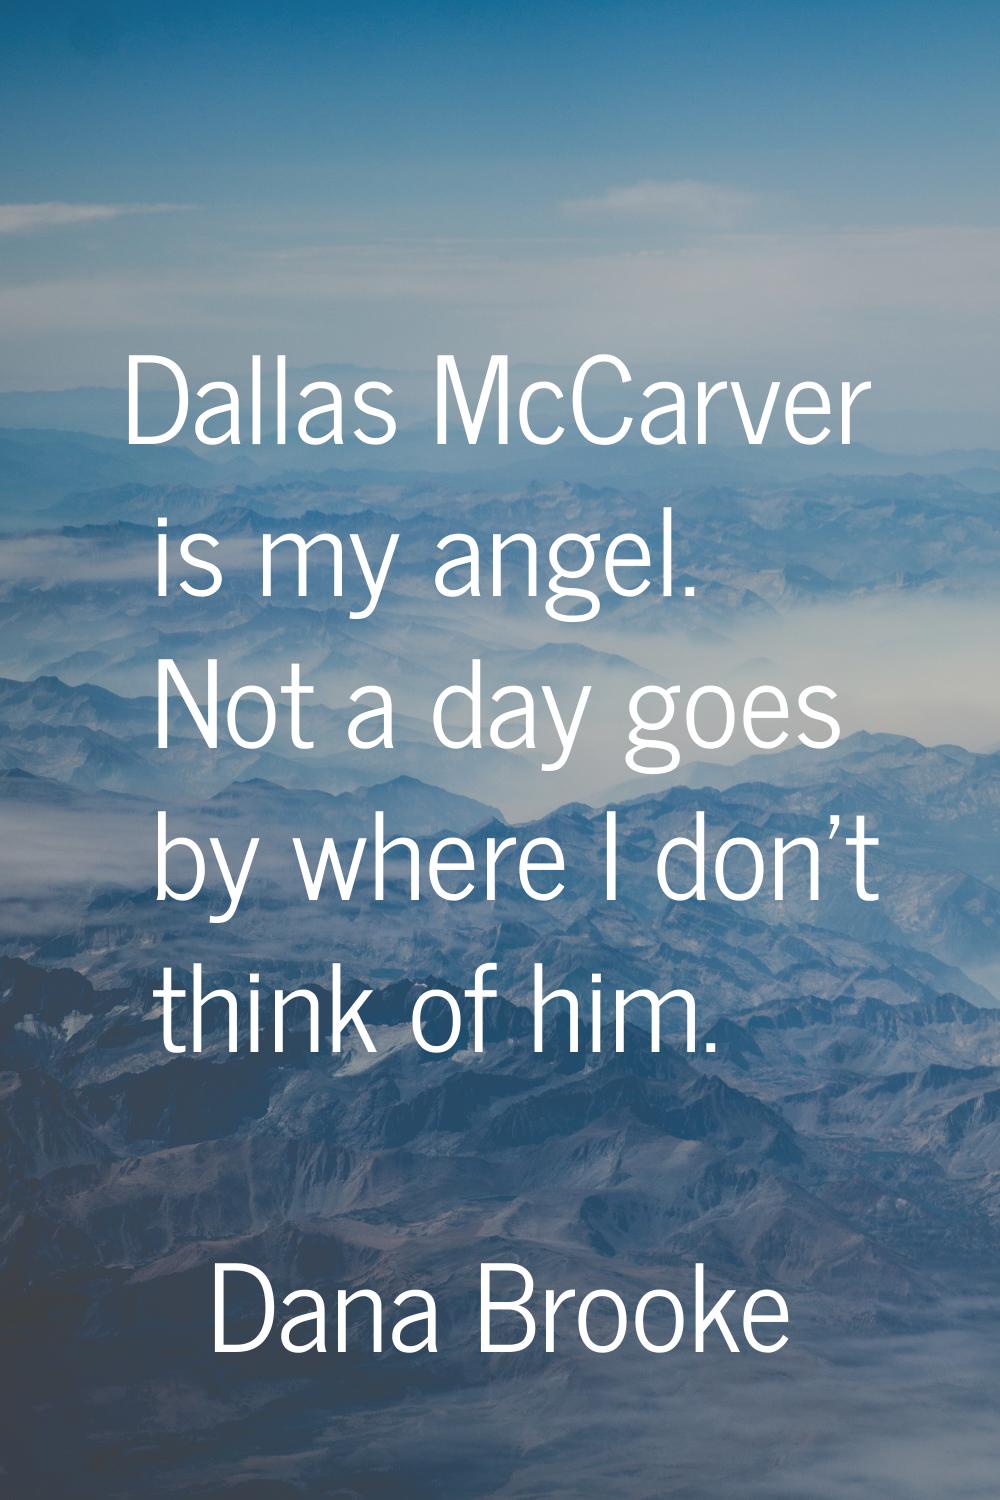 Dallas McCarver is my angel. Not a day goes by where I don't think of him.